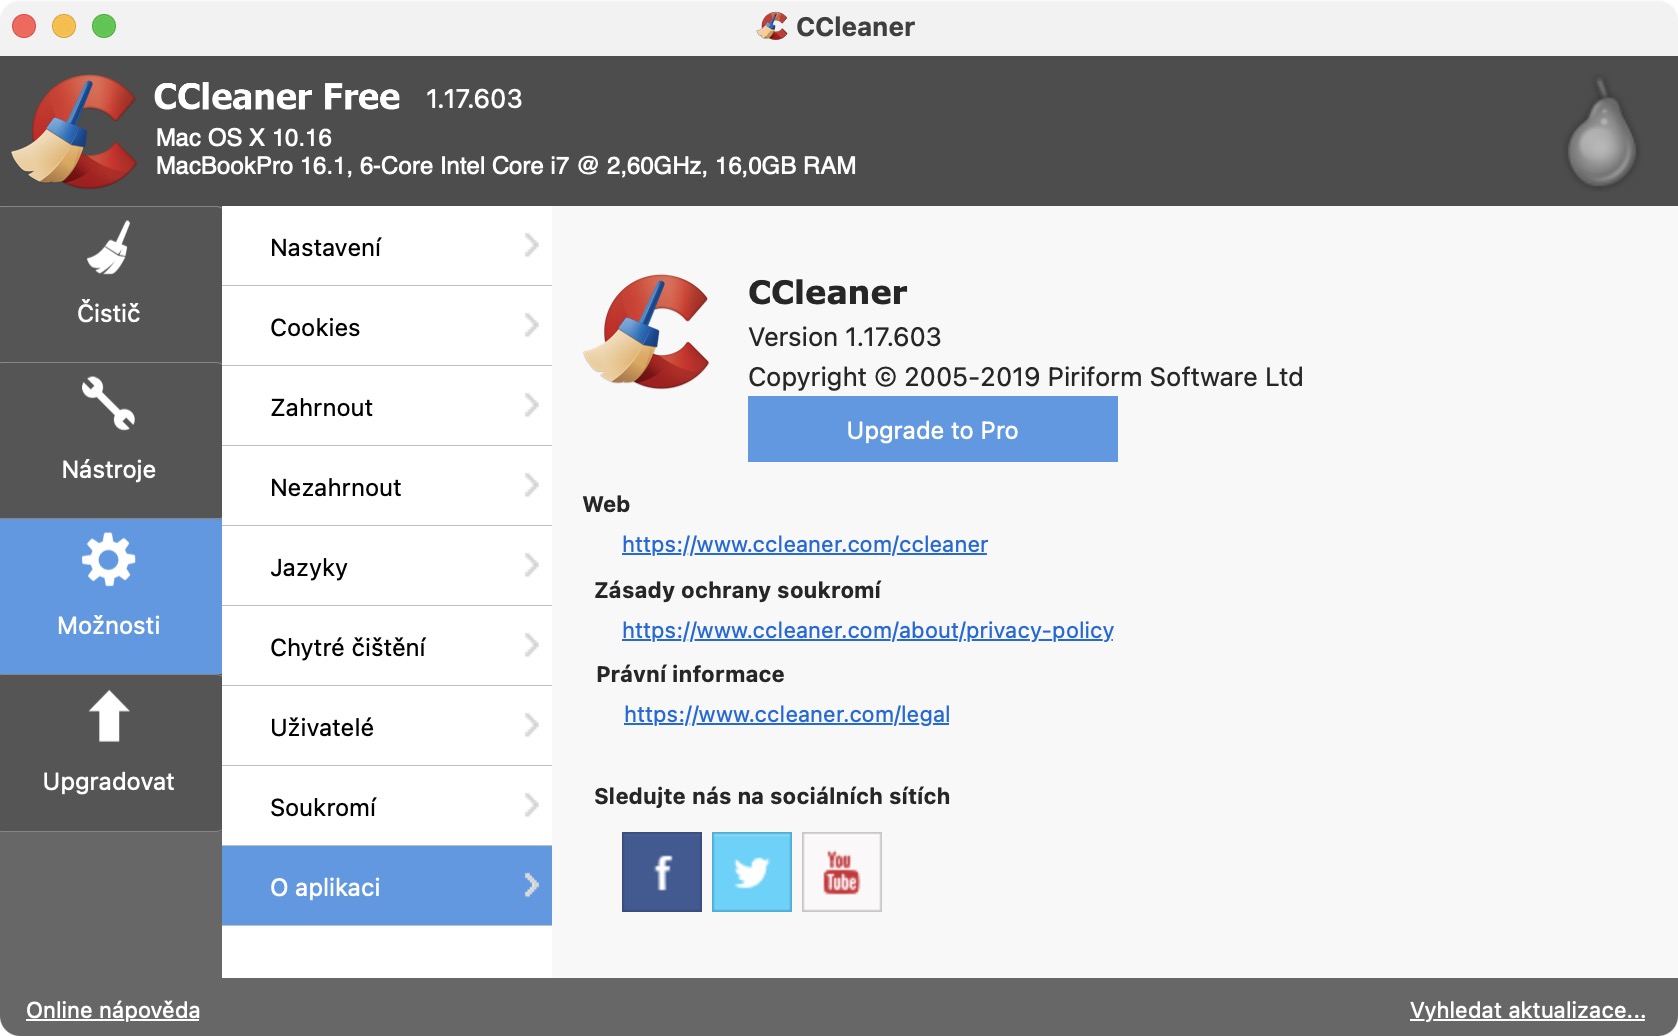 instal the new for apple CCleaner Professional 6.13.10517